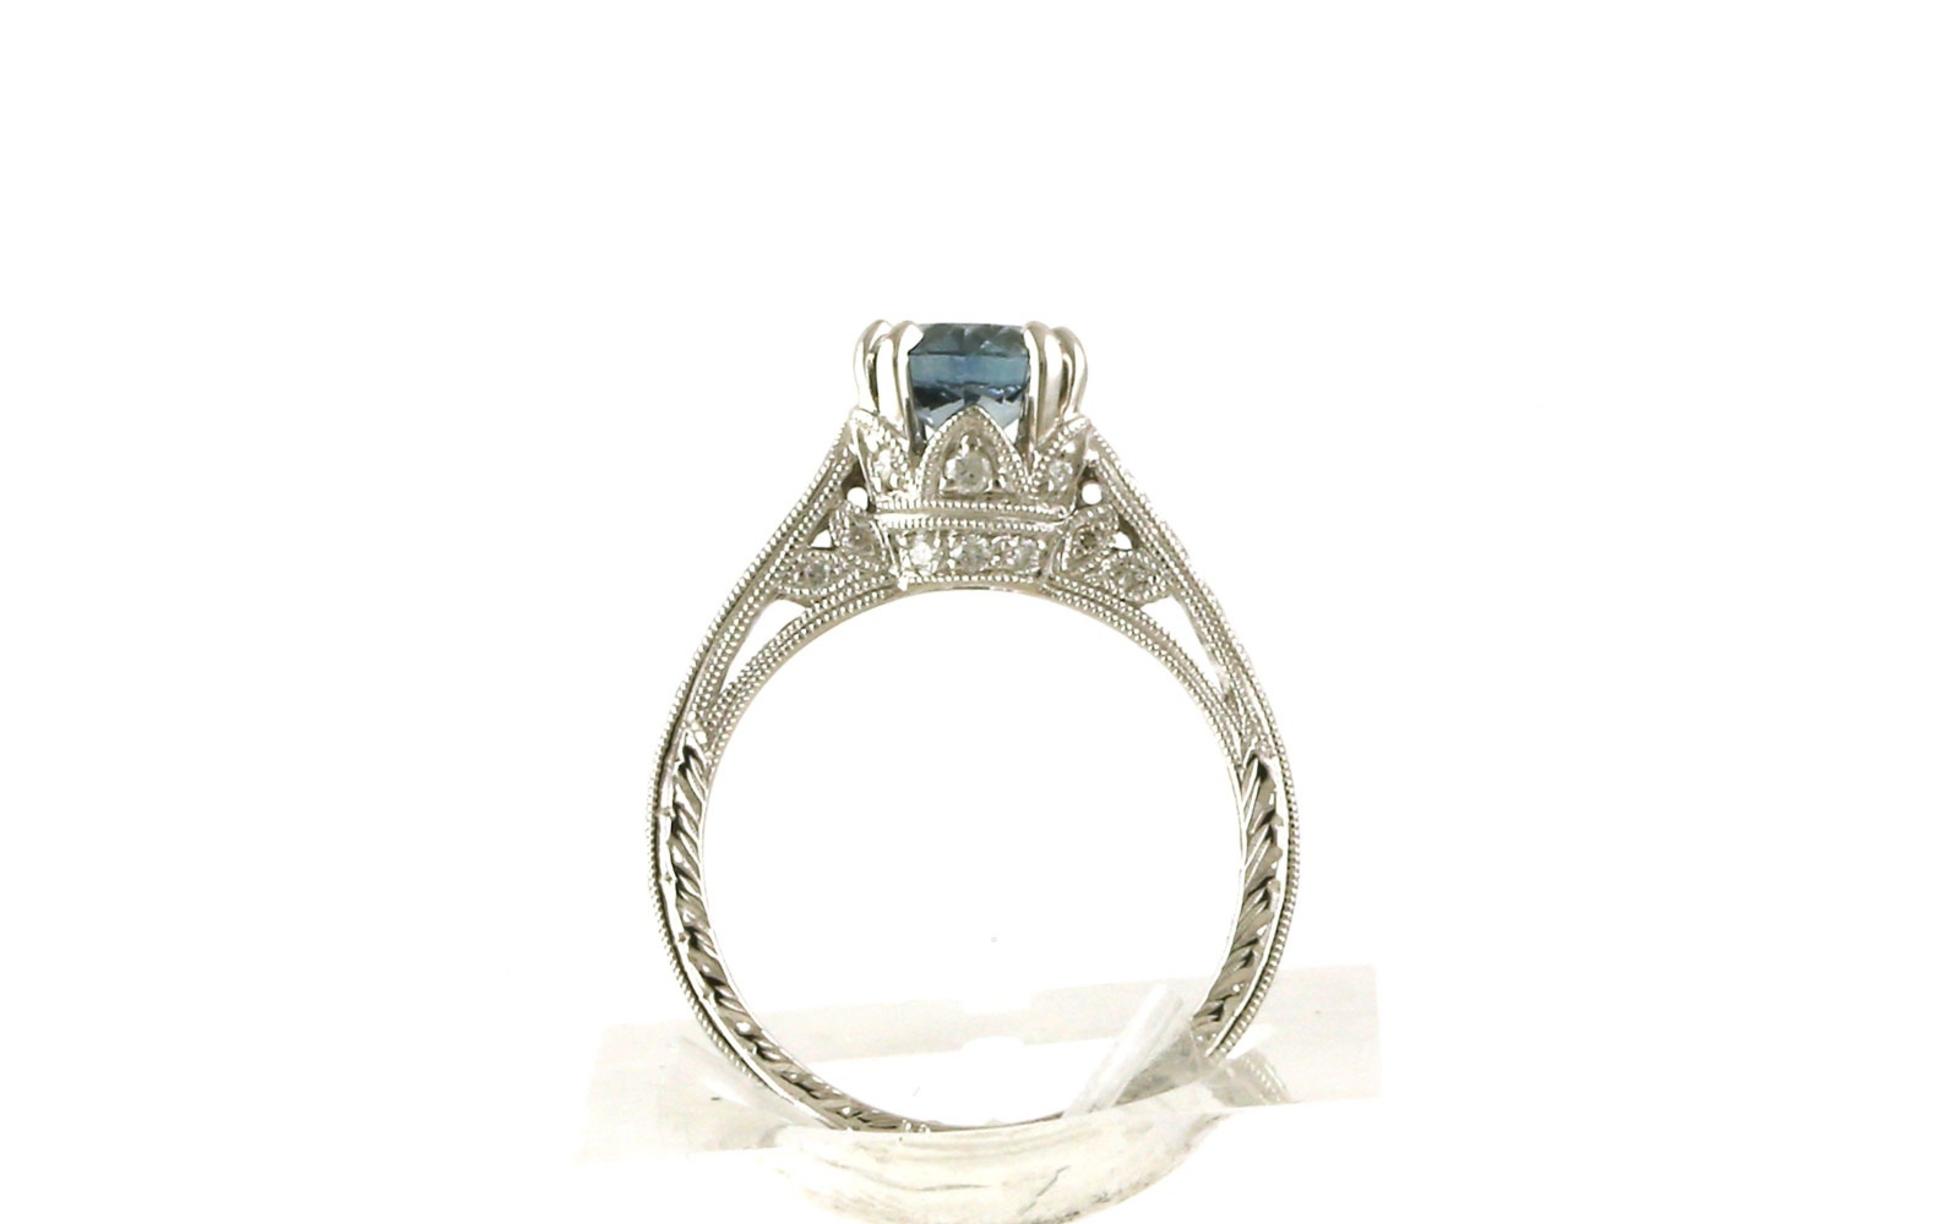 8-Prong Montana Sapphire Ring with Diamond Accented Crown and Hand Engraving Details in White Gold (1.32cts) side